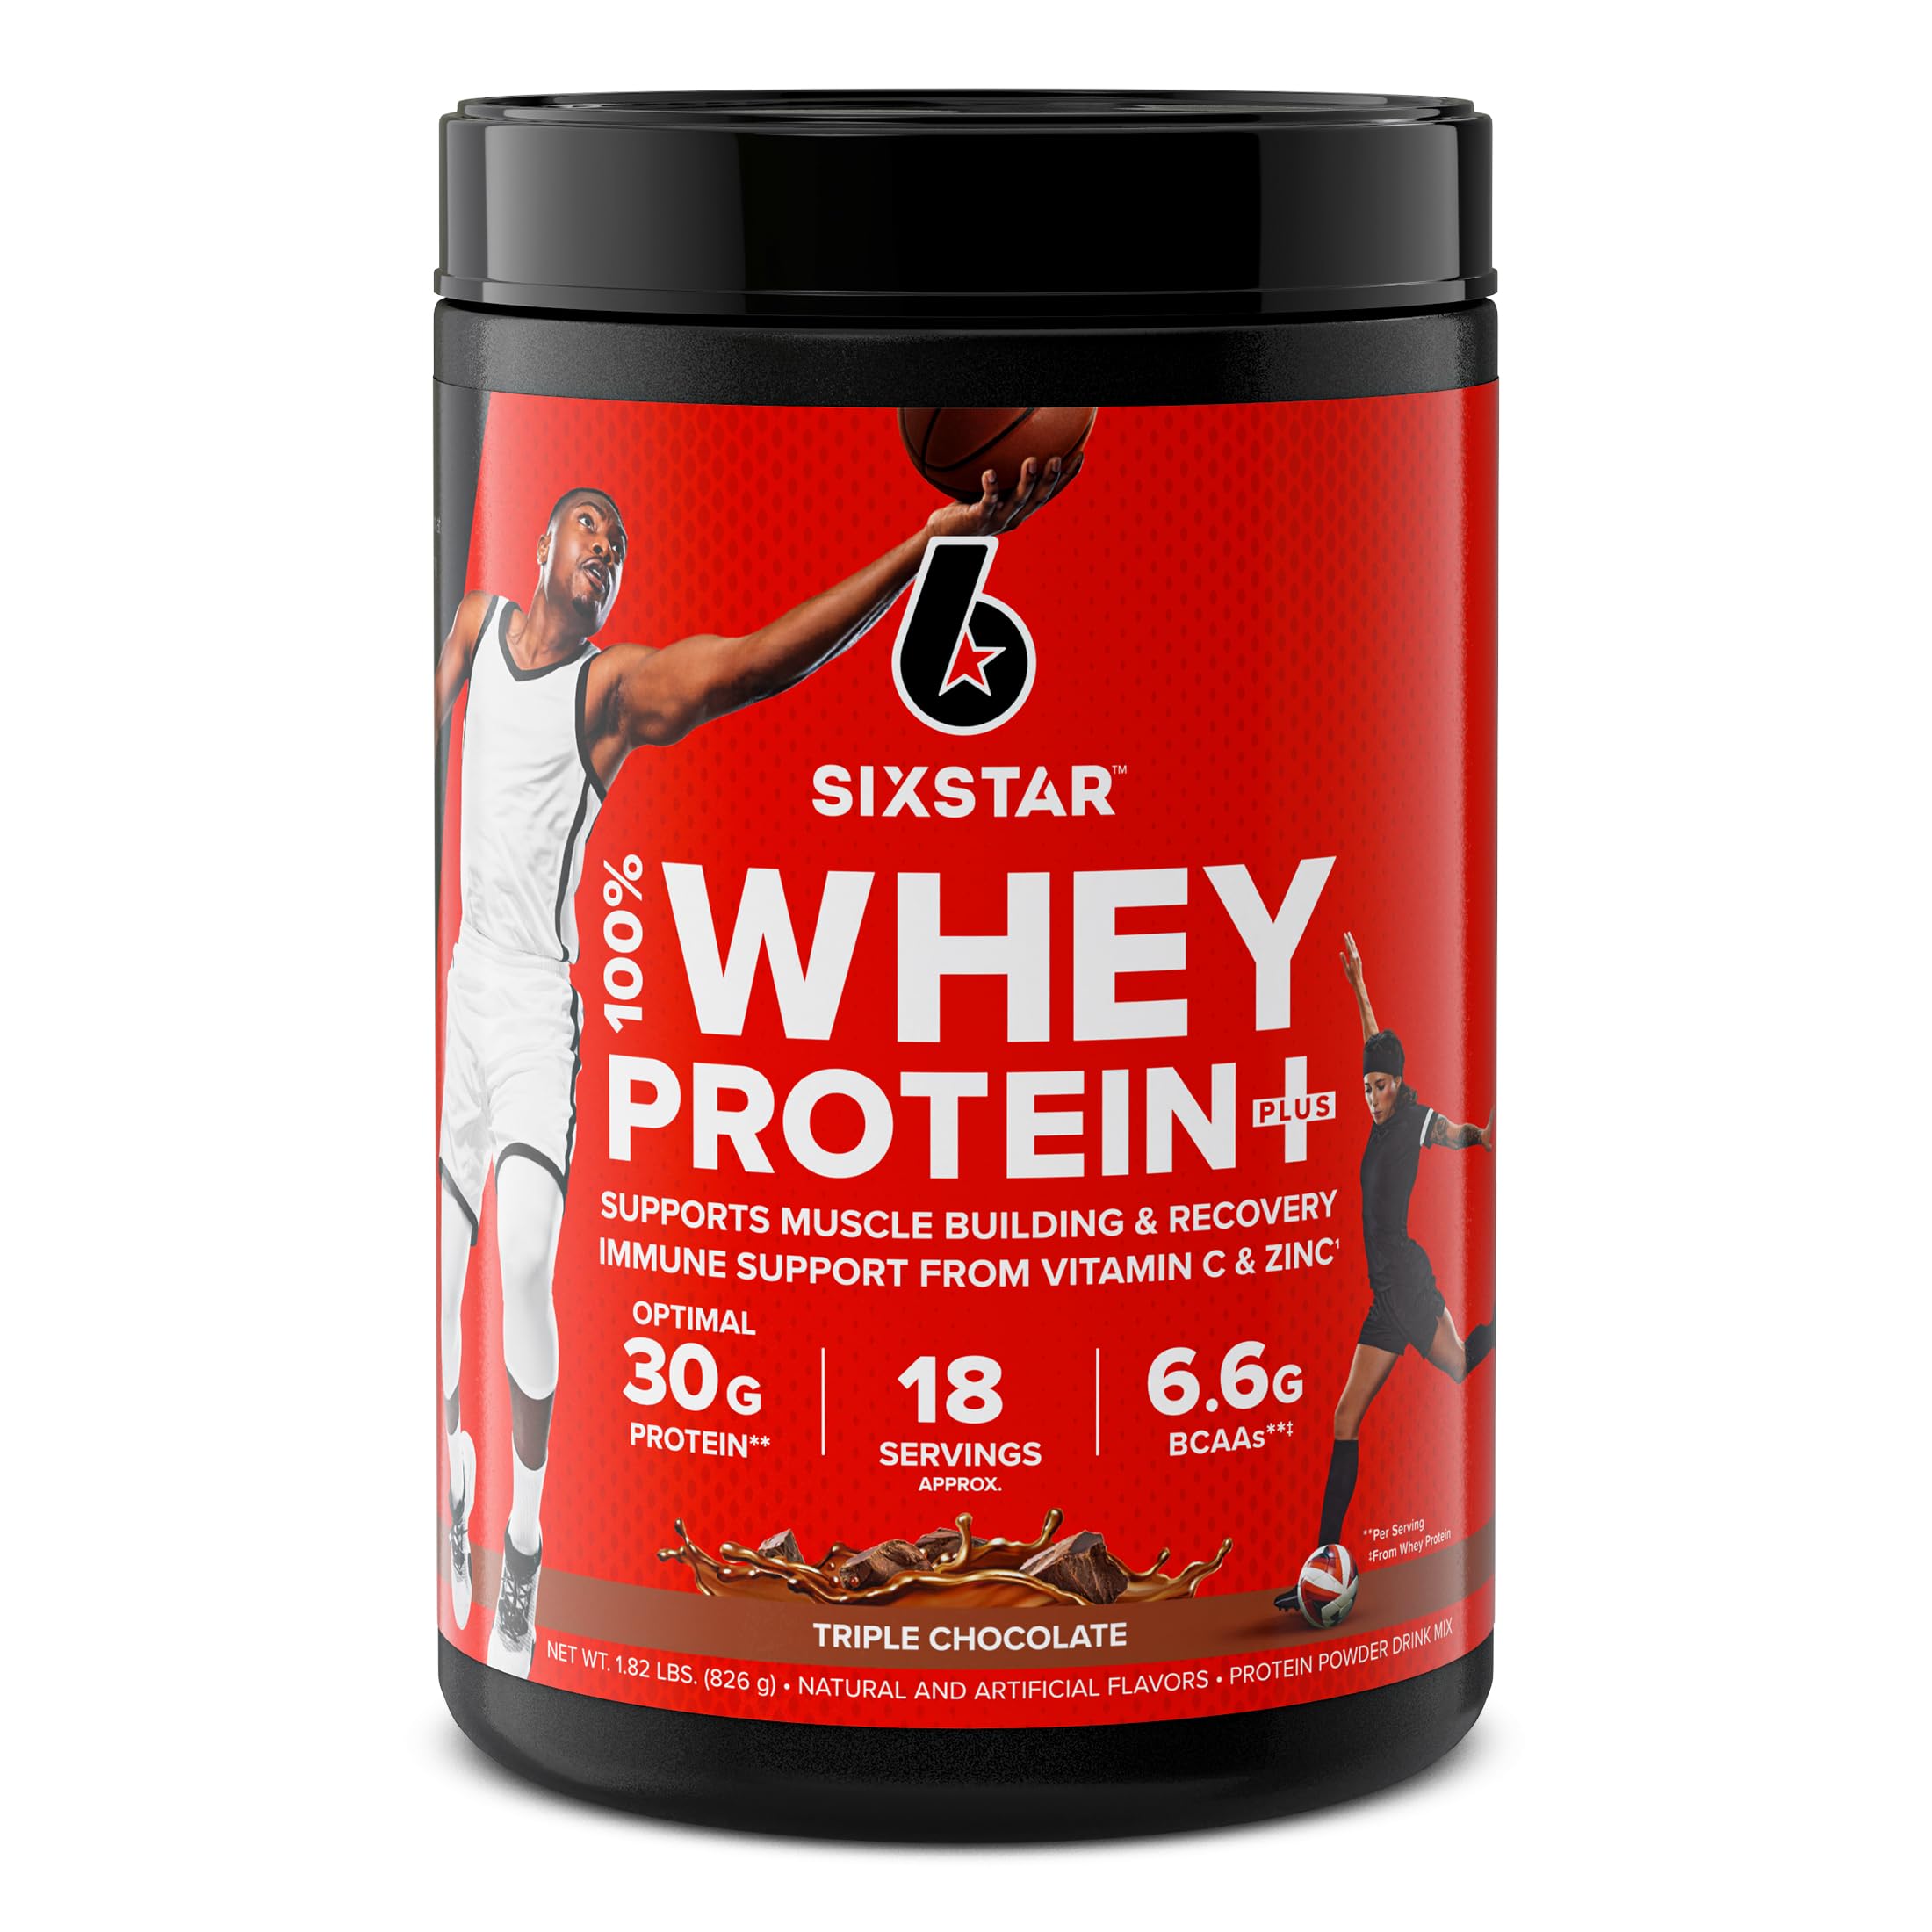 Whey Protein Powder | Six Star Whey Protein Plus | Whey Protein Isolate & Peptides- 1.8 lbs, $14.07 or less